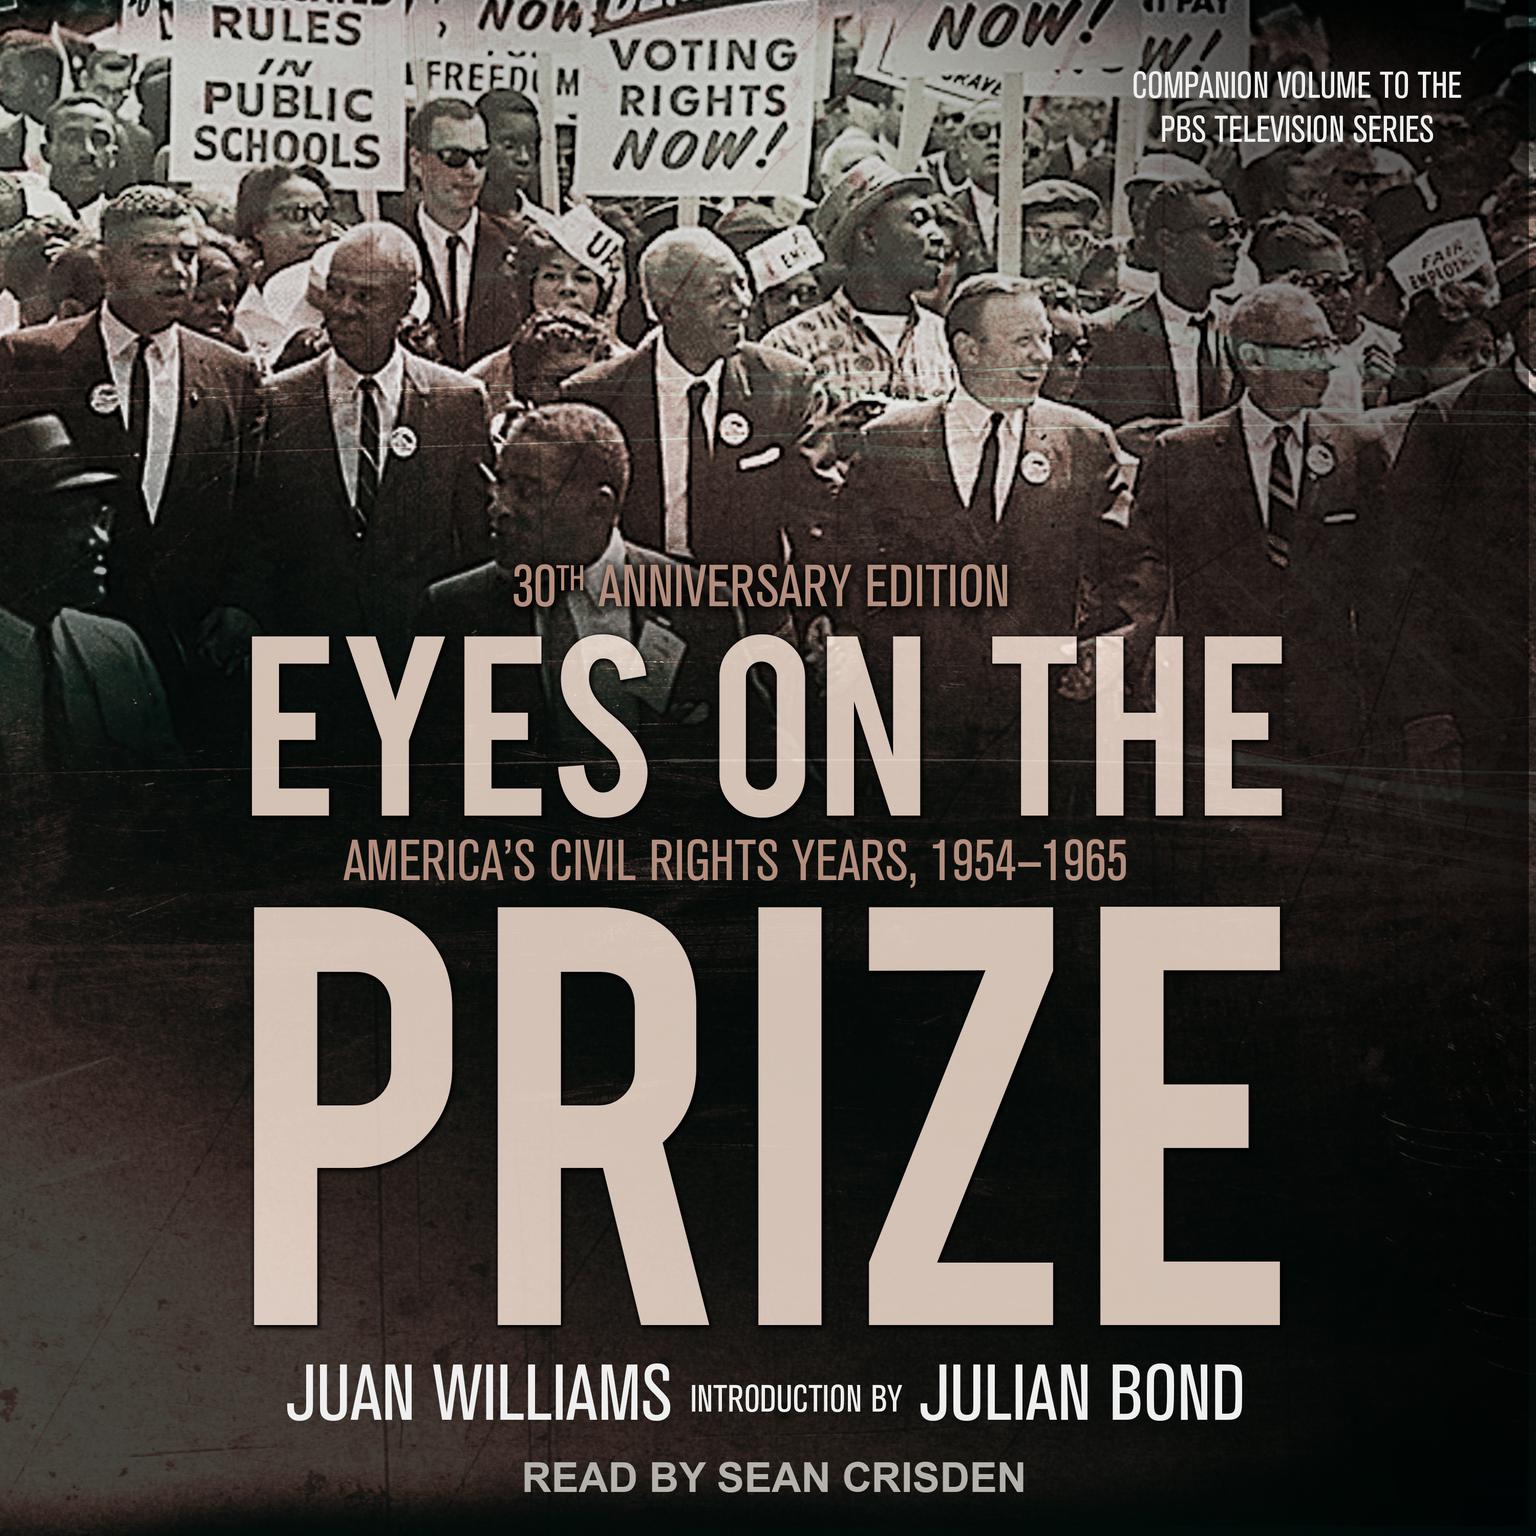 Eyes on the Prize: Americas Civil Rights Years, 1954-1965 Audiobook, by Juan Williams